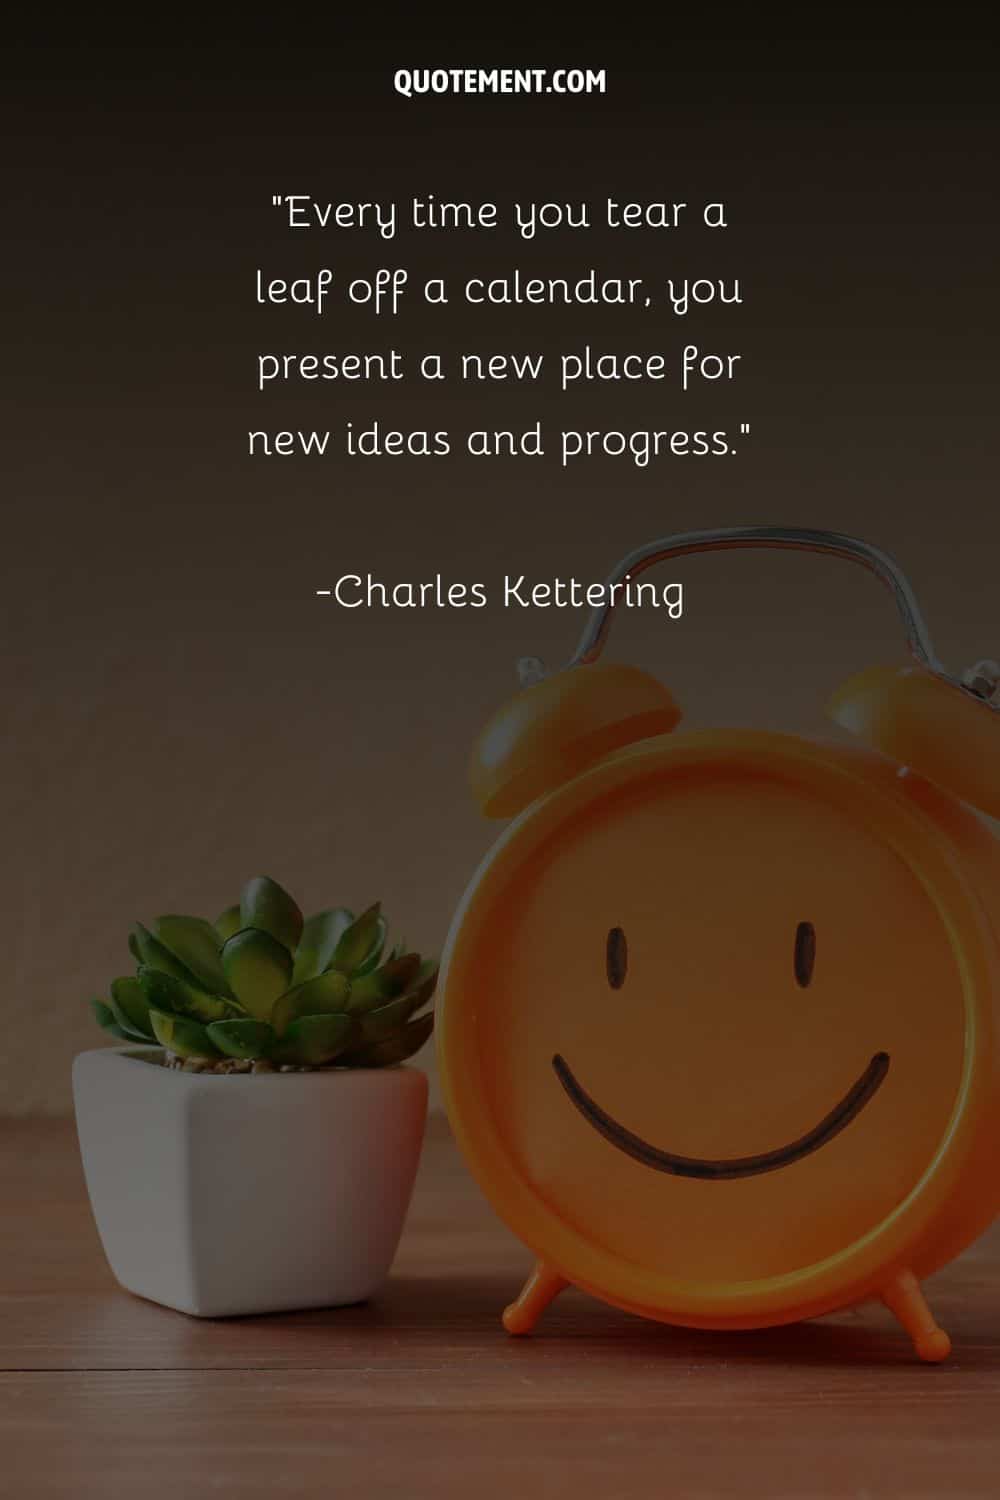 Charming succulent paired with an orange clock representing top new month quote